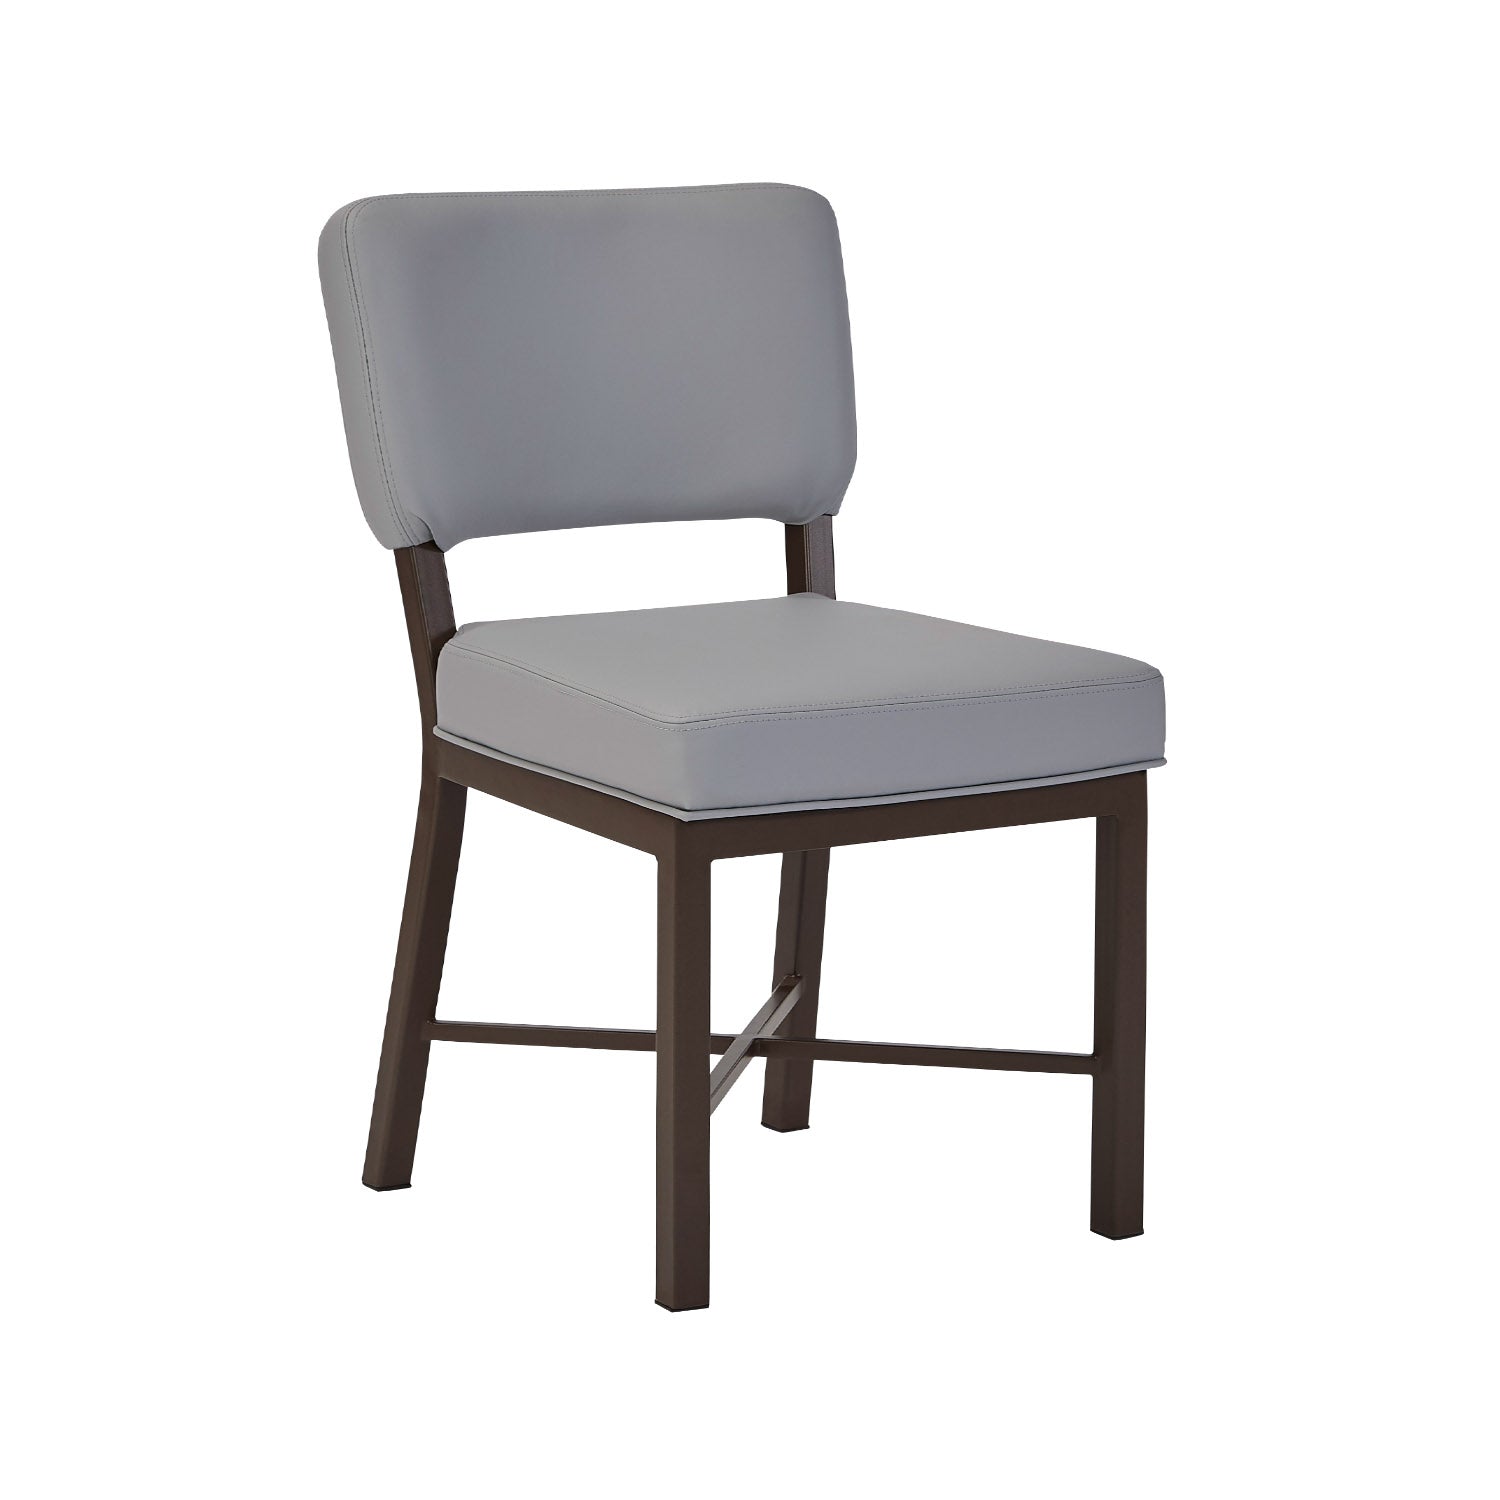 Wesley Allen Miami Chair with Dillon Steel Vinyl in Caapucino Finish.